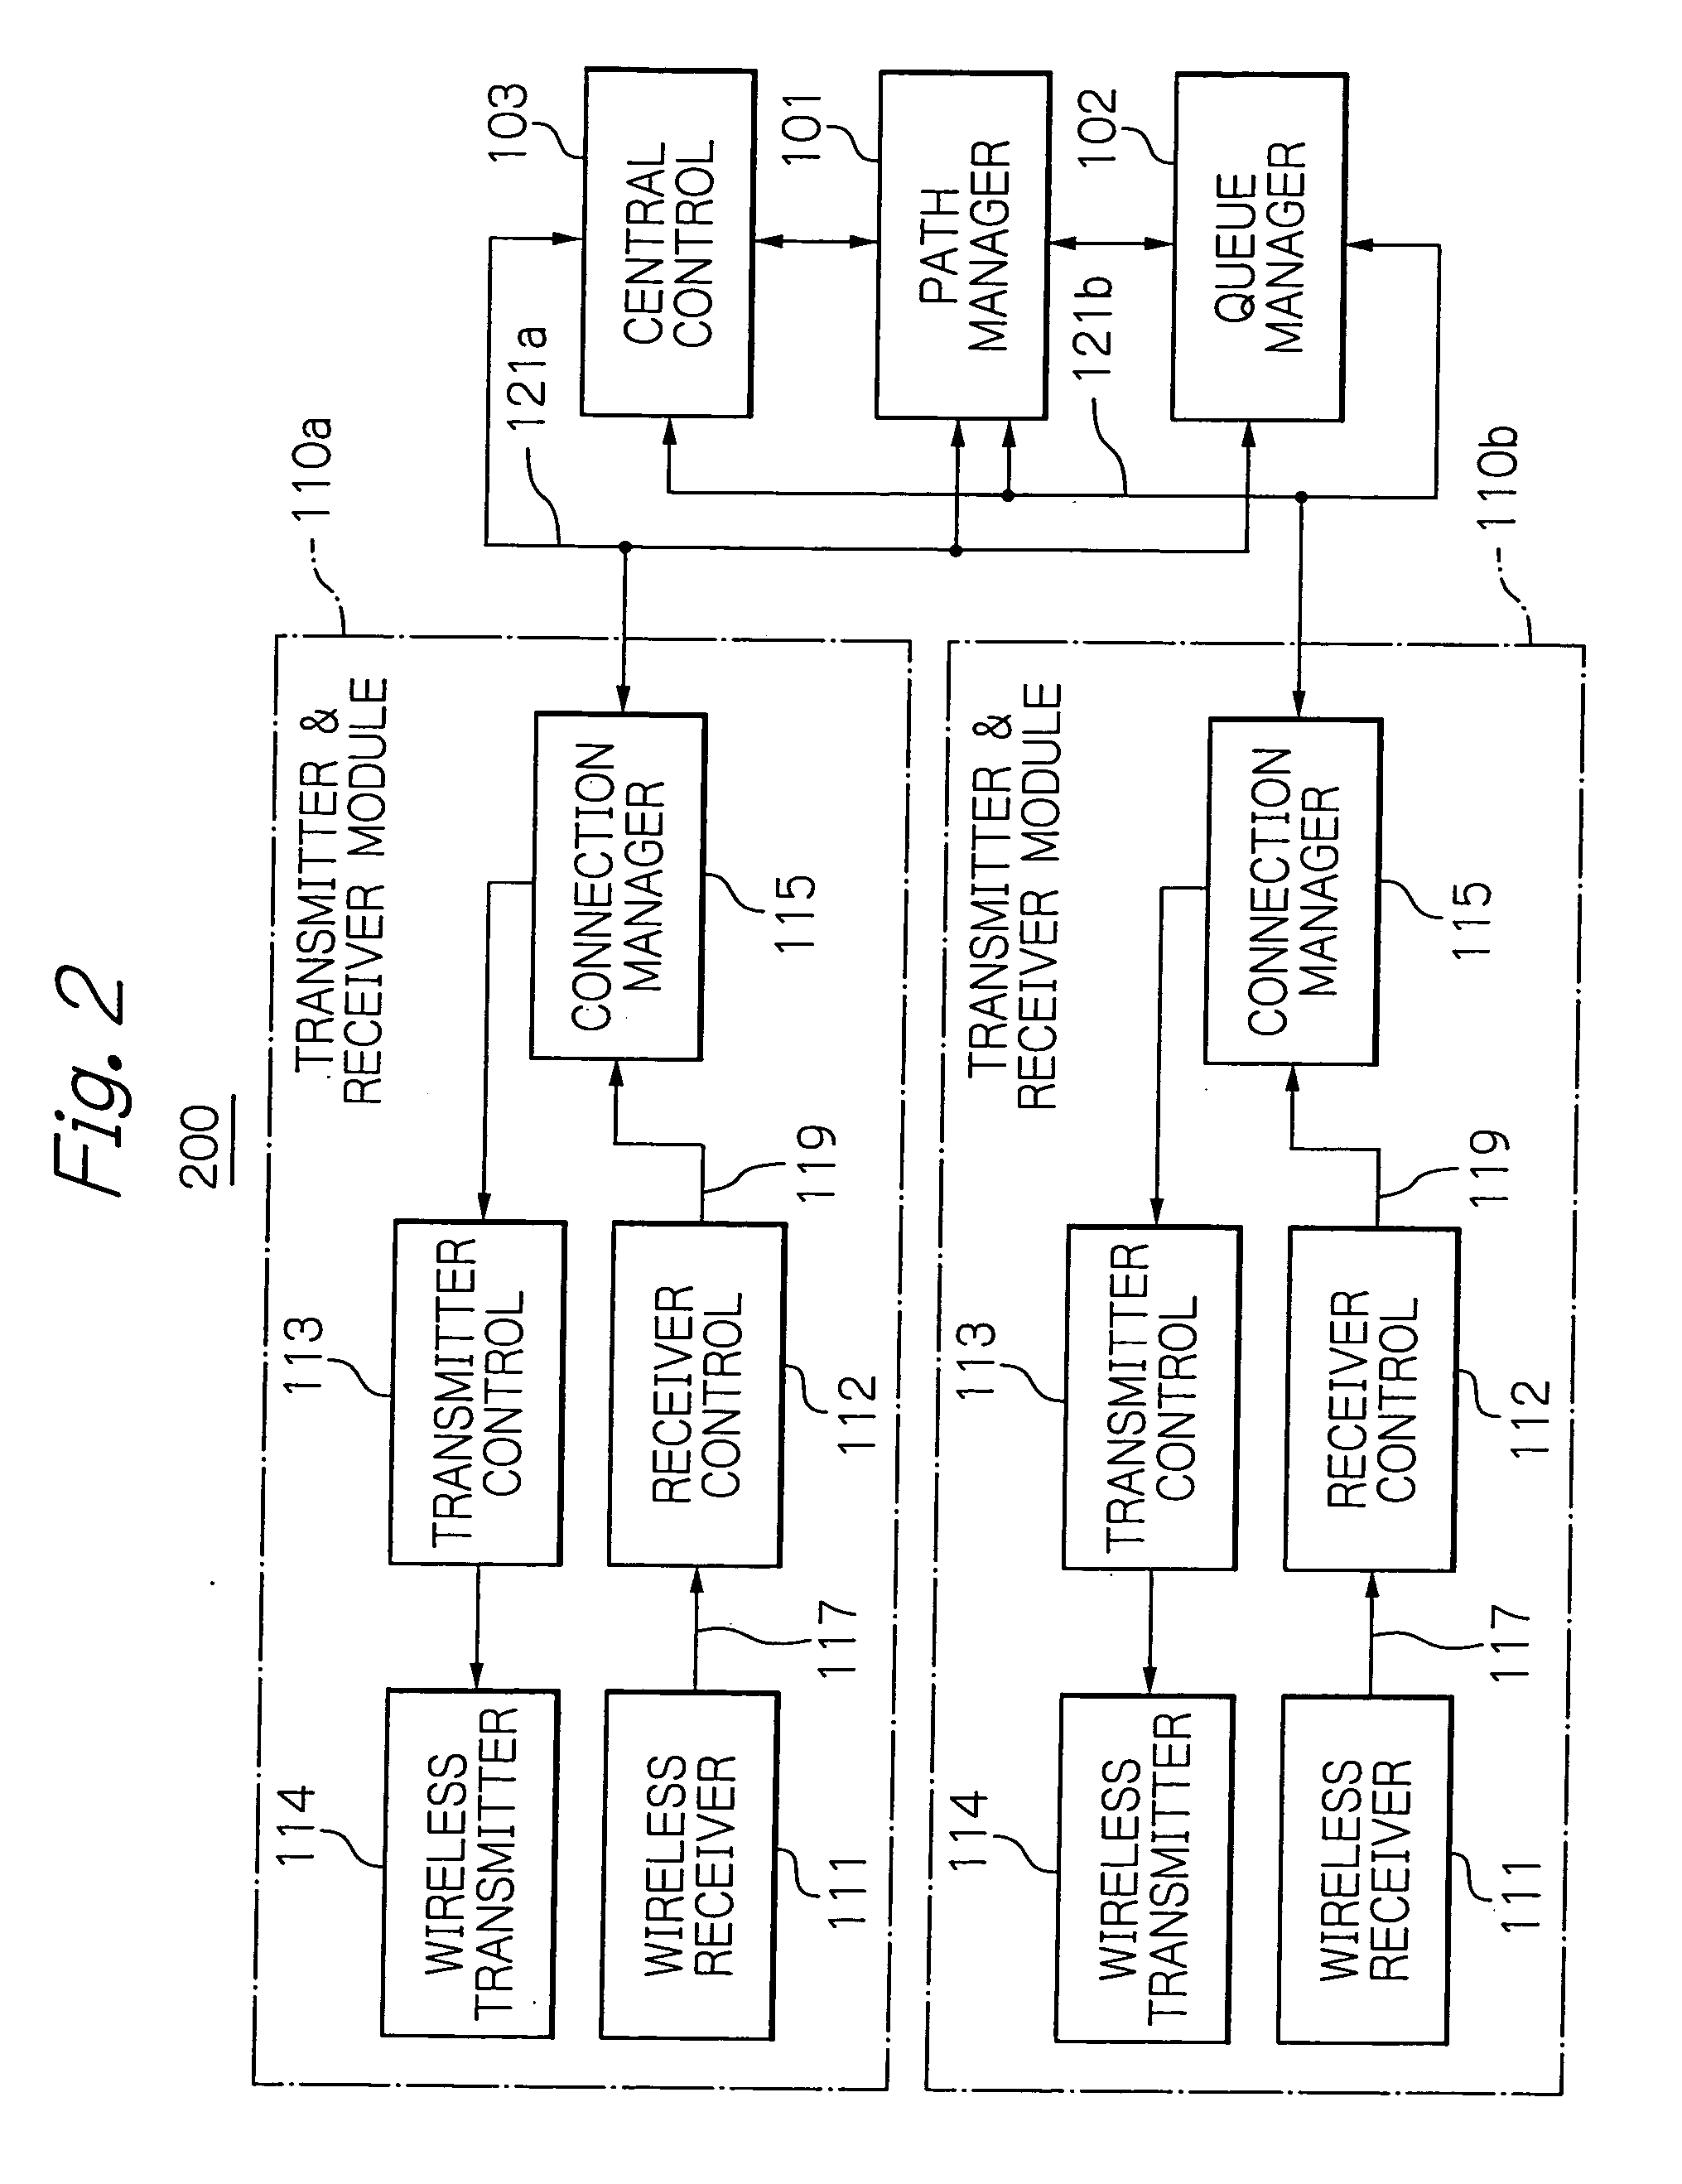 Network configuration method allotting channels to wireless stations by generating a broadcast tree